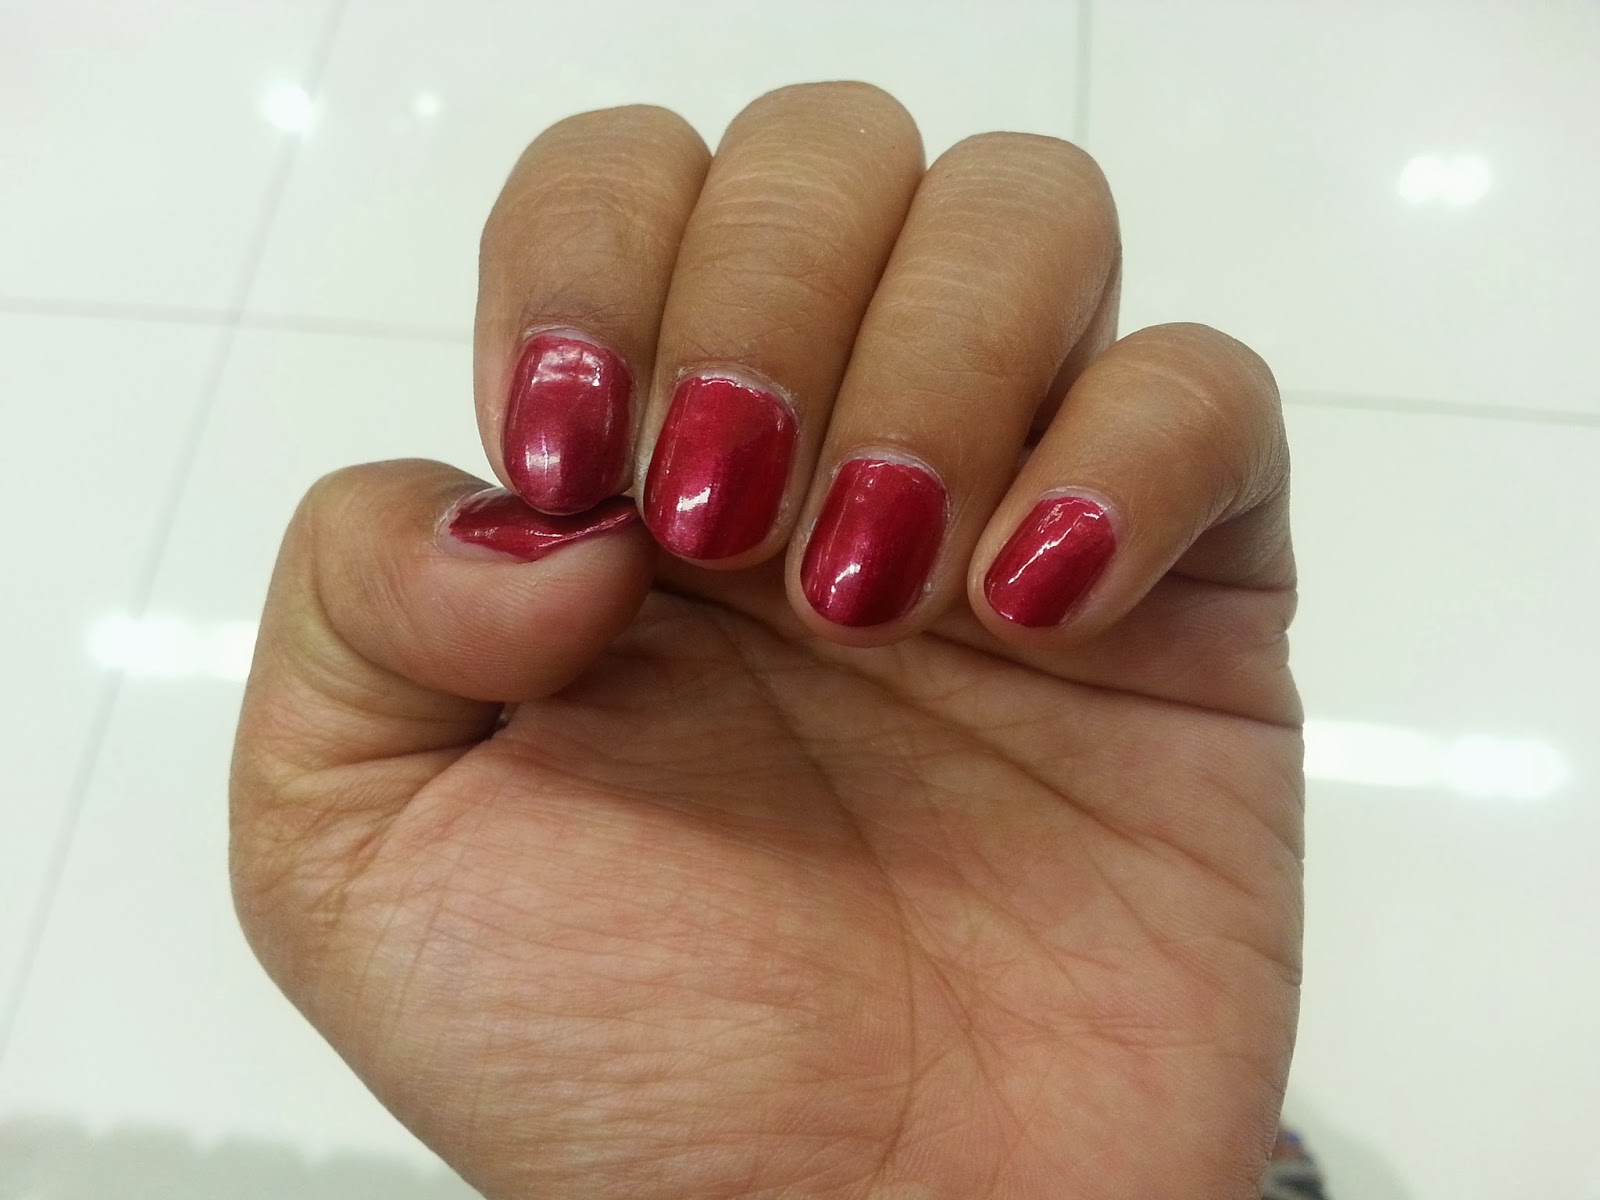 5. OPI GelColor in "I'm Not Really a Waitress" - wide 7